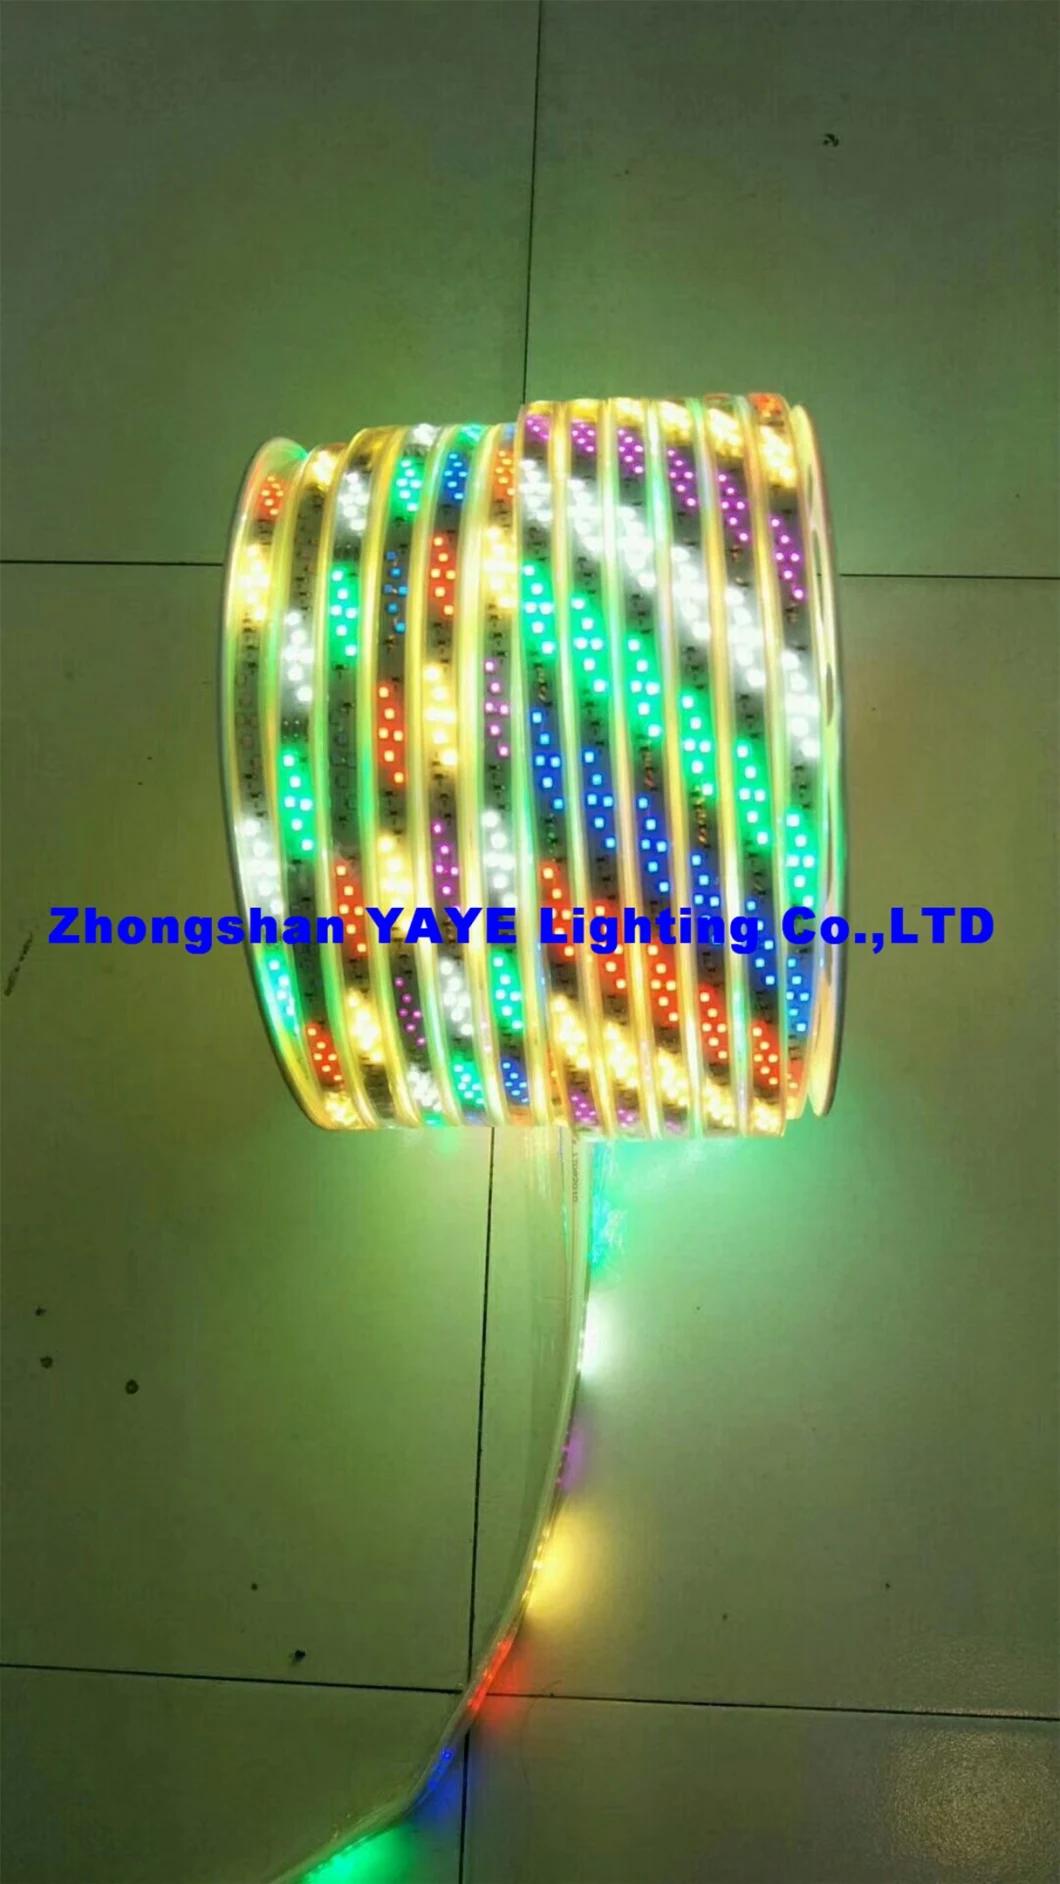 Yaye Hottest Sell Outdoor Waterproof IP65 Rgby/RGB/R/Y/W/B/G Solar Decorative LED Christmas Holiday String Light for Home/ Garden/Street/ Yard/Party